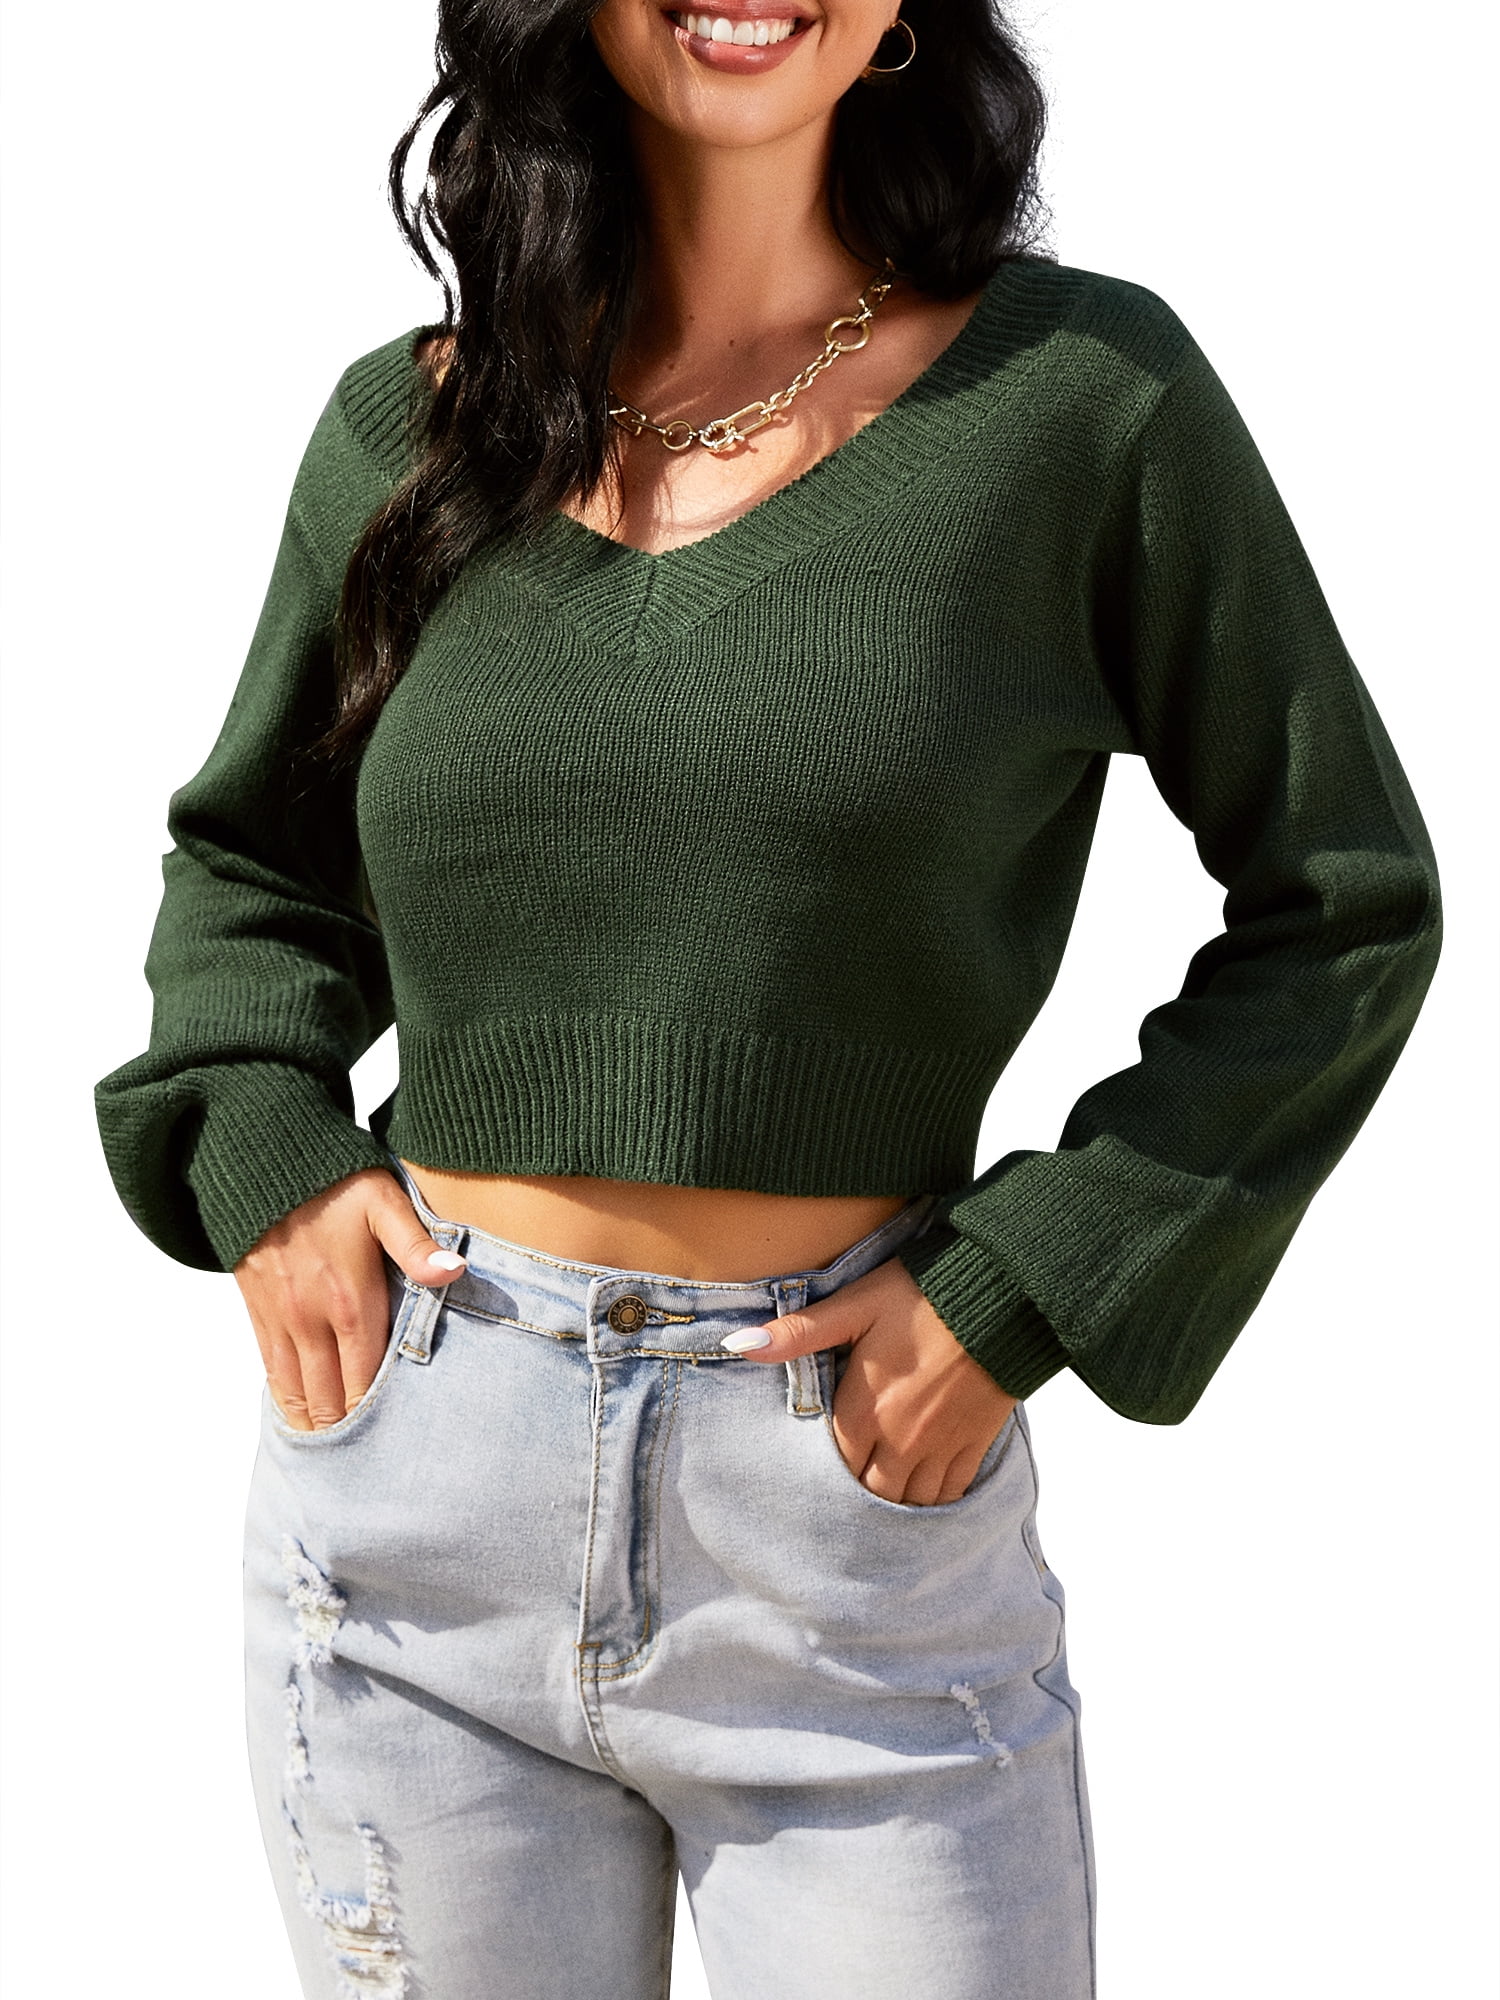 ZAFUL Women's Double V-Neck Long Sleeve Crop Loose Pullover Sweater ...